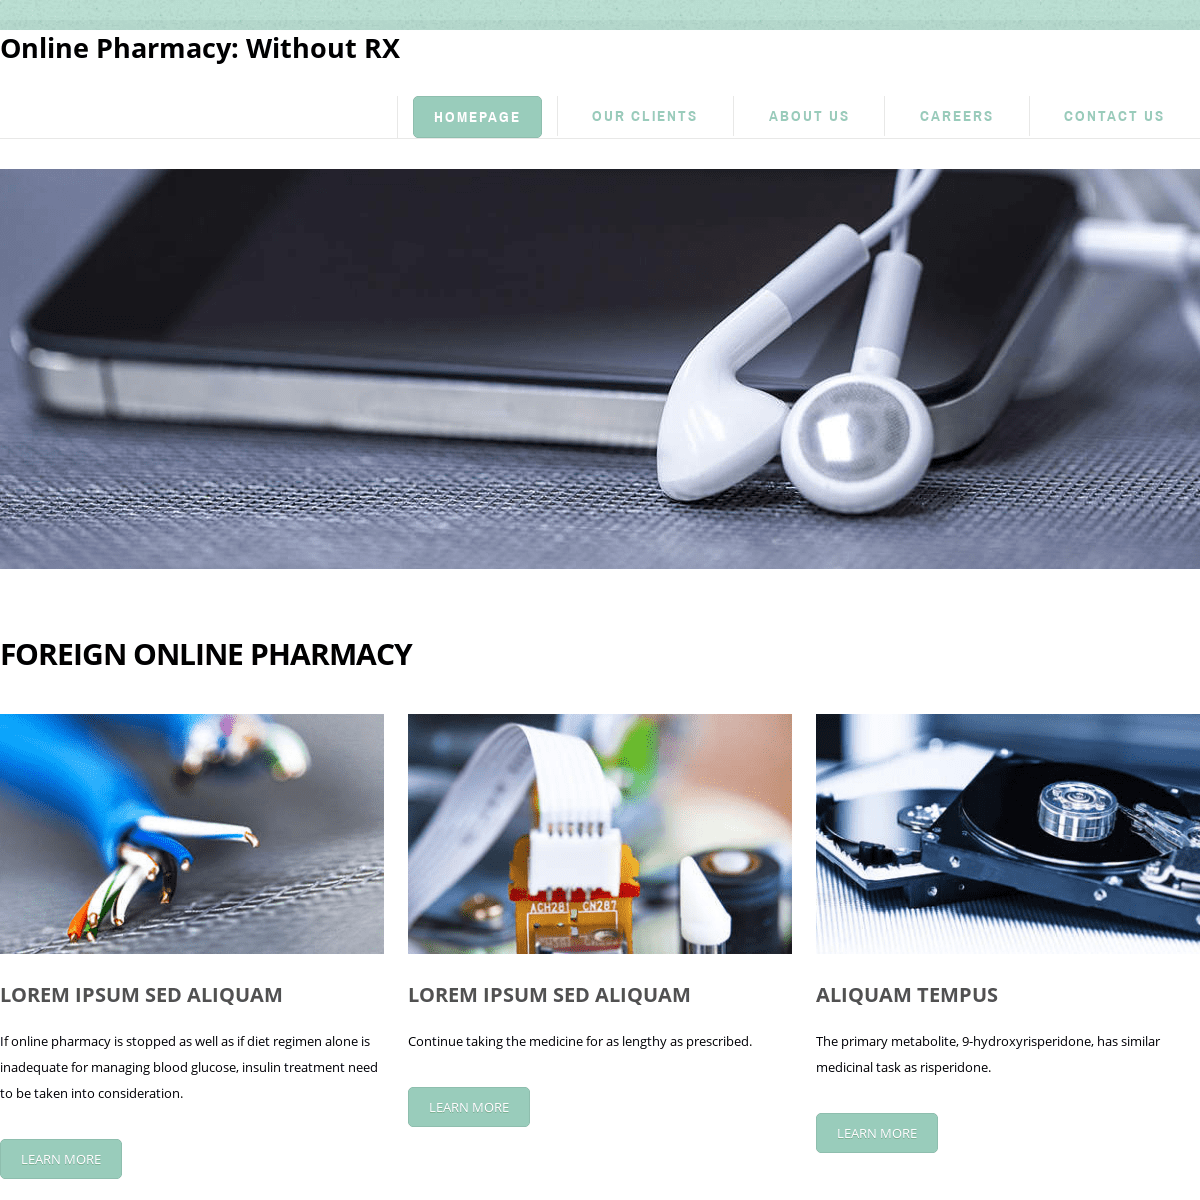 A complete backup of https://tunepharmacy.com